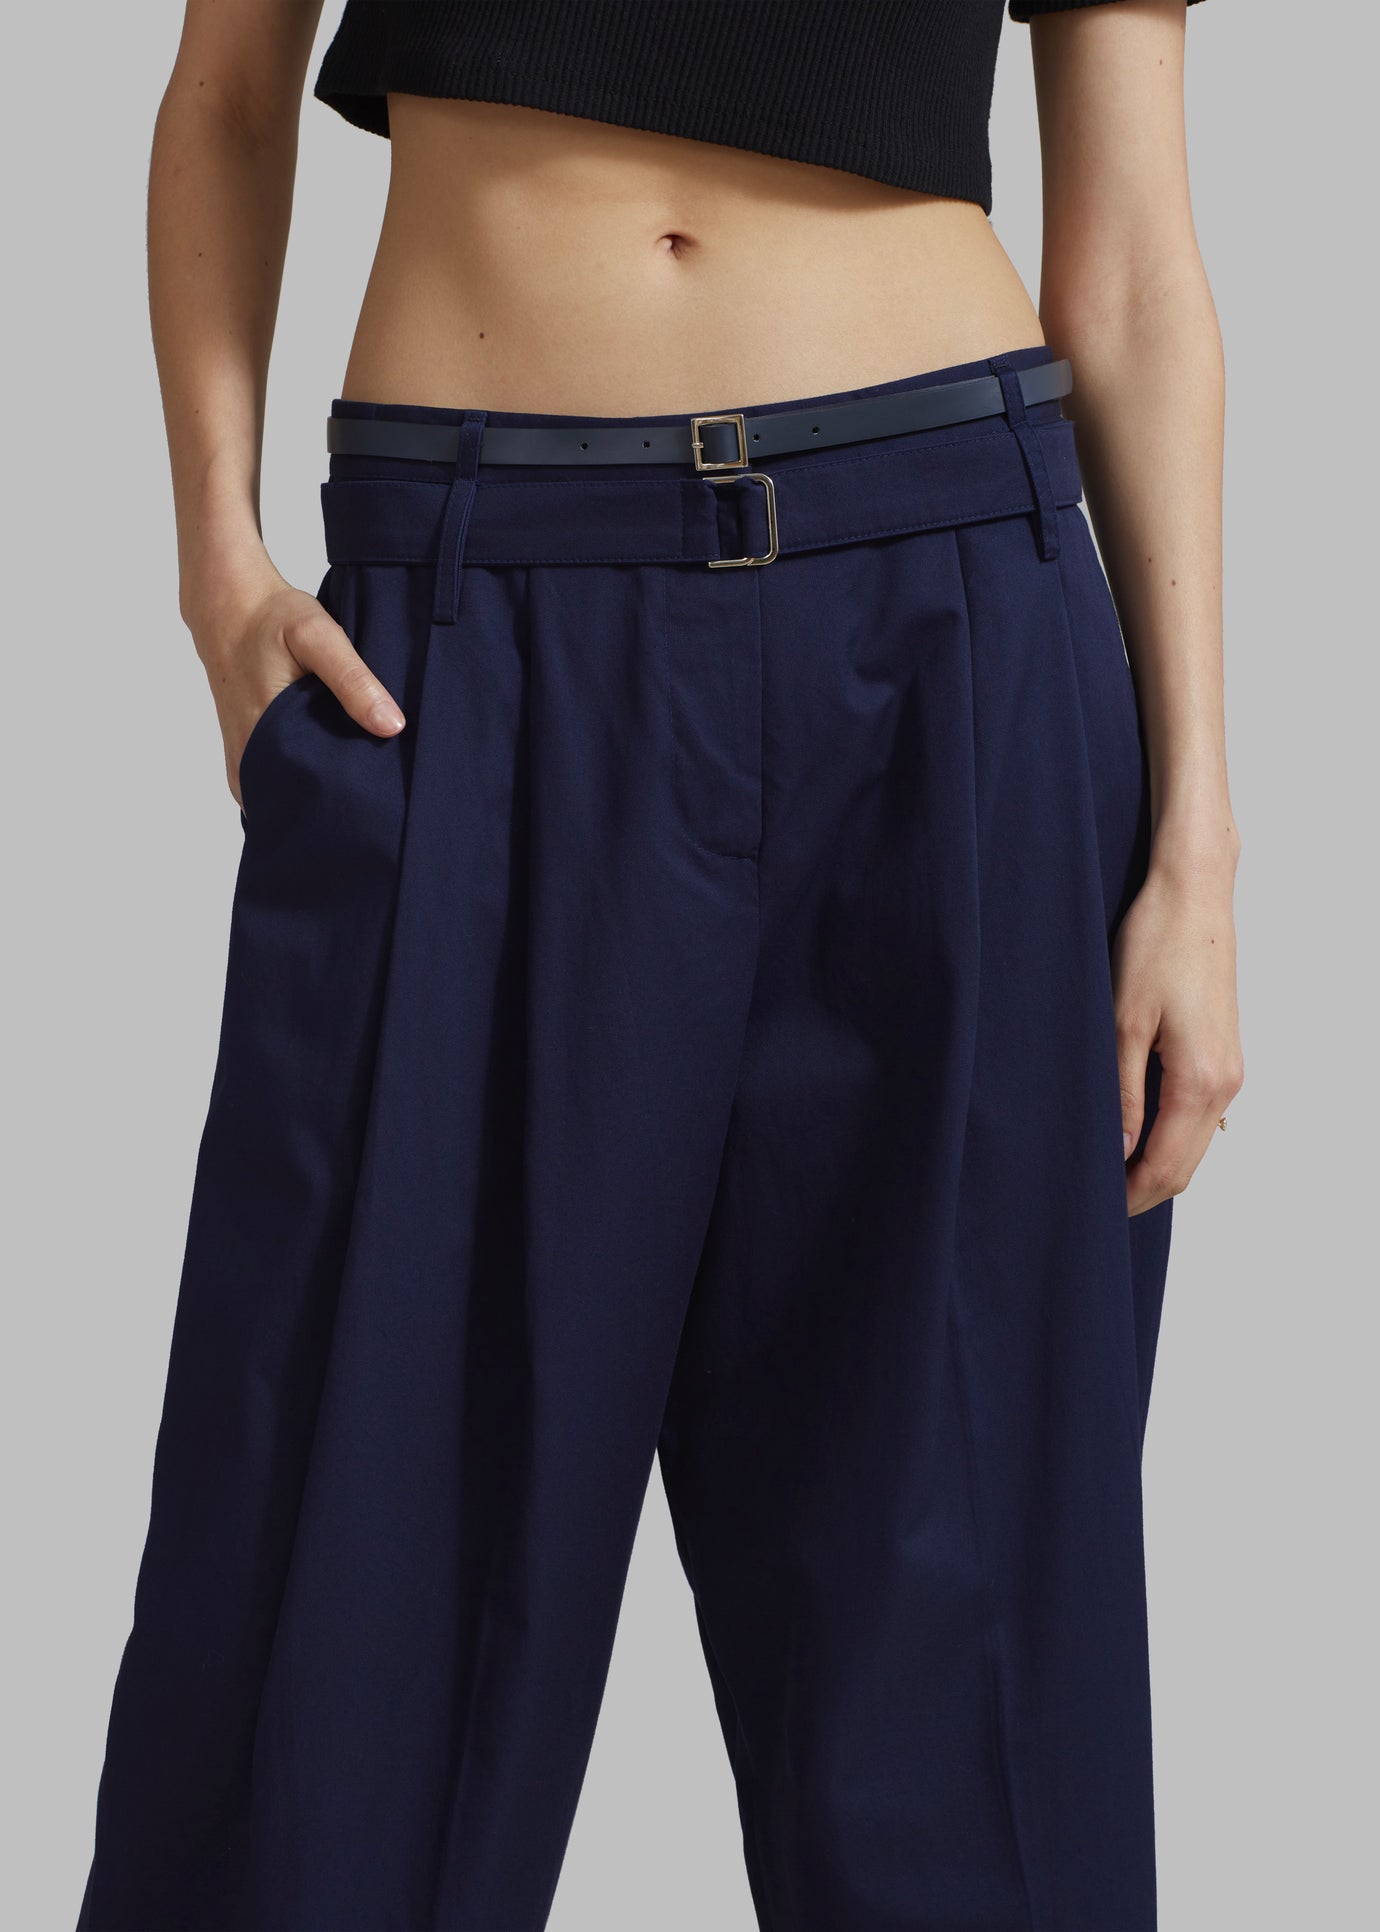 Joan Double Belted Pants - Navy - 1